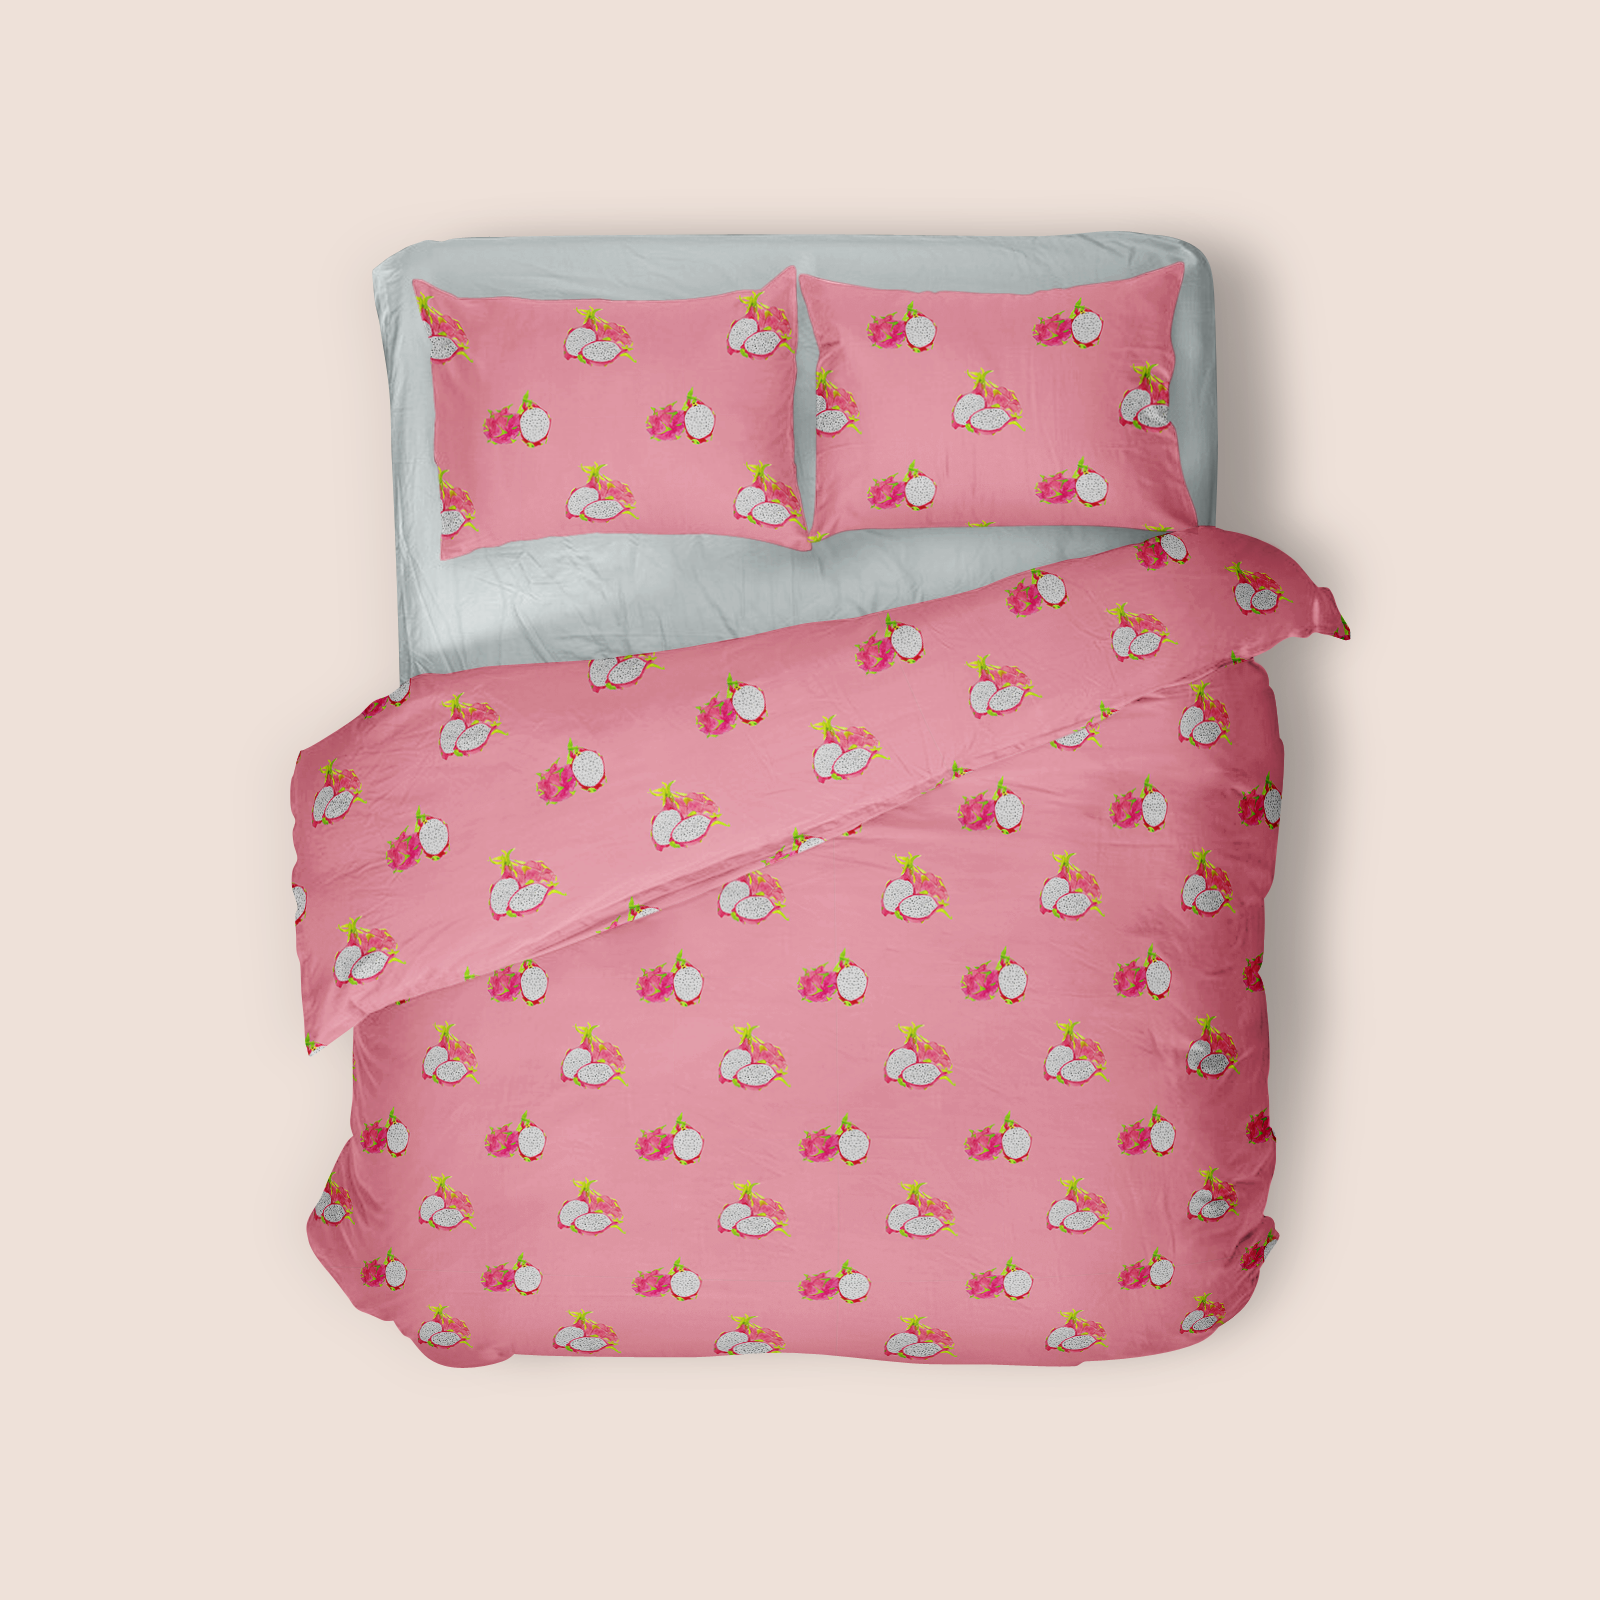 Dragon fruit small in pink pattern design on recycled fabric canvas mockup